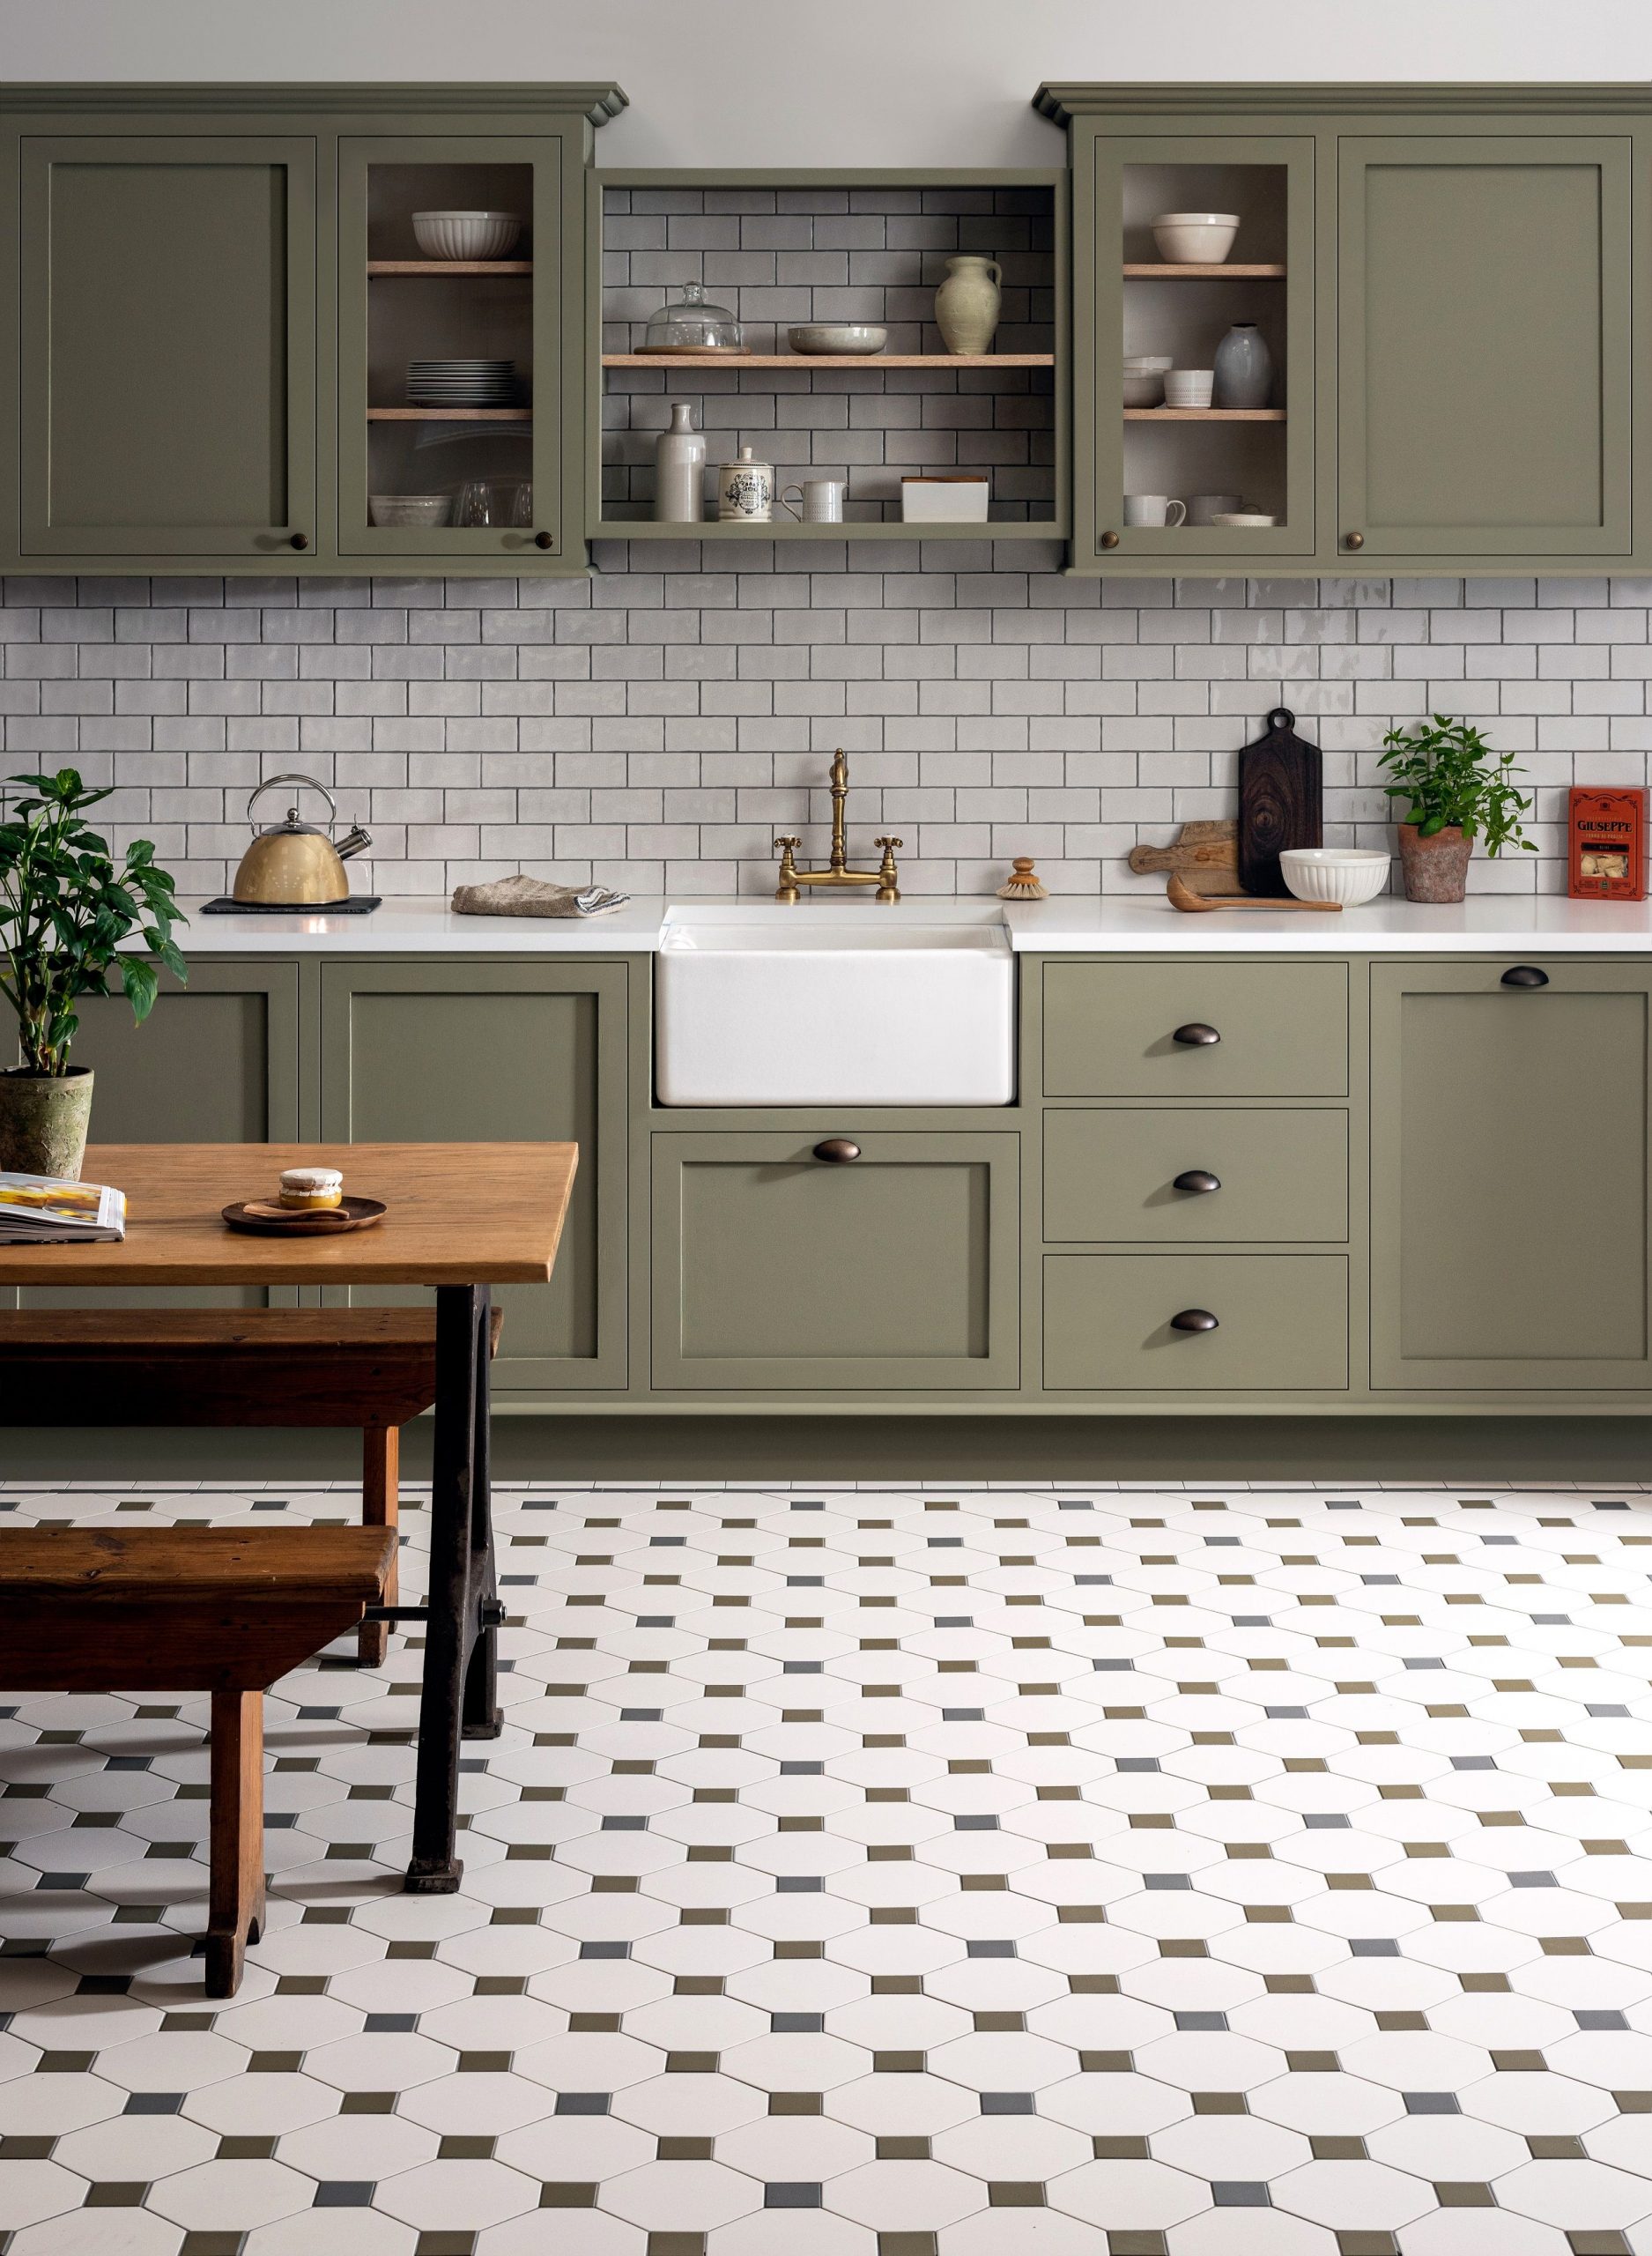 Kitchen Style With Victorian Floor Tiles Scaled, Design Authority